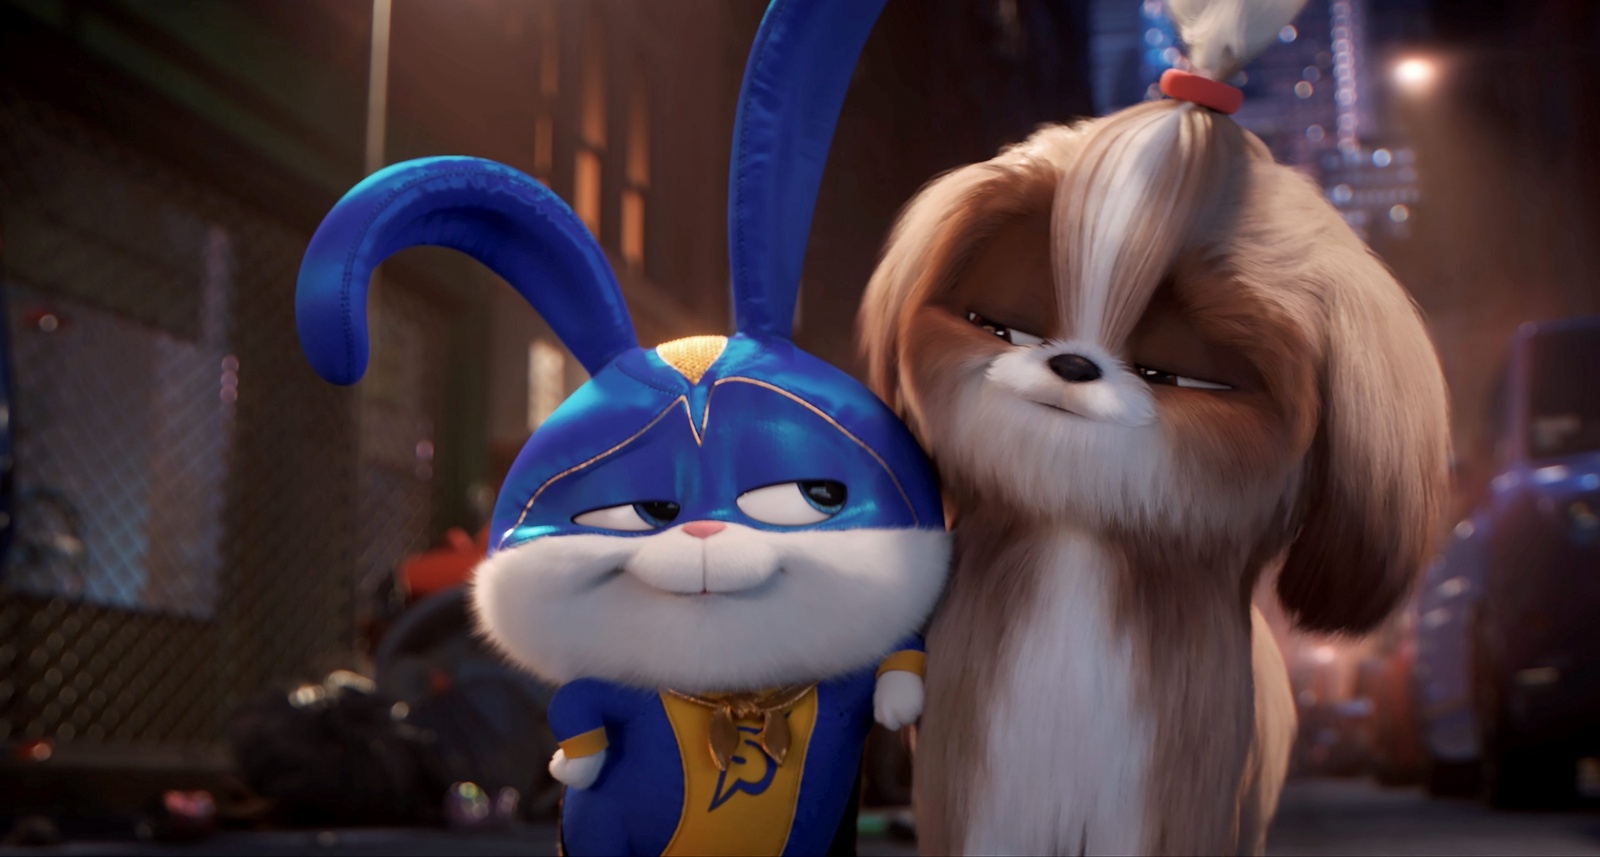 This image released by Universal Pictures shows Snowball, voiced by Kevin Hart, left, and Daisy, voiced by Tiffany Haddish in a scene from ”The Secret Life of Pets 2.” (Illumination Entertainment/Universal Pictures via AP)